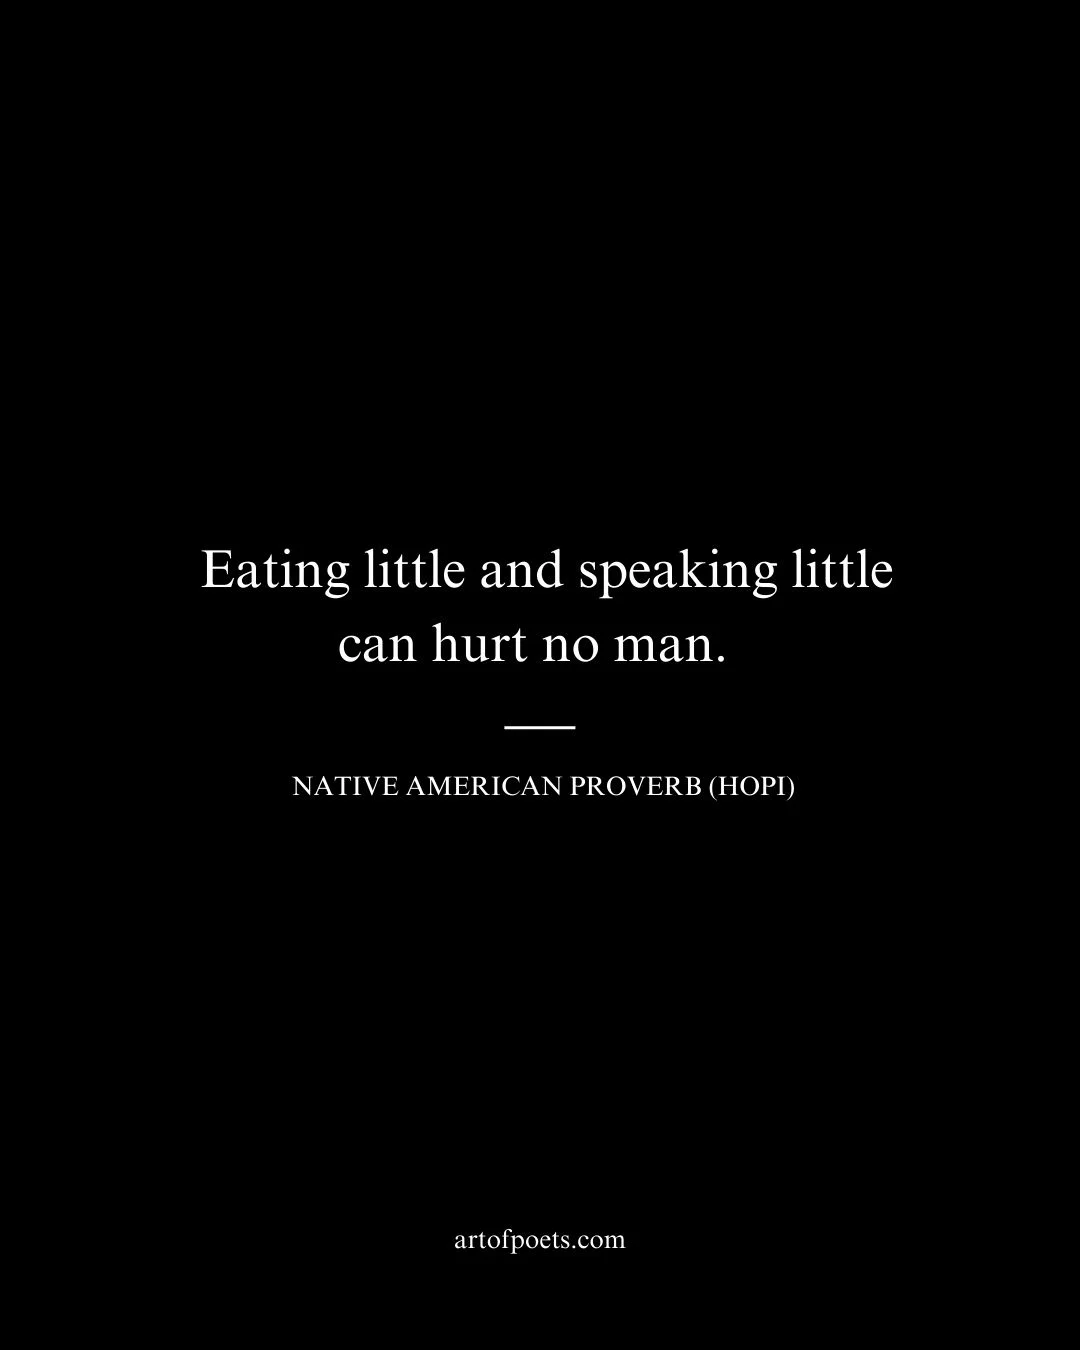 Eating little and speaking little can hurt no man